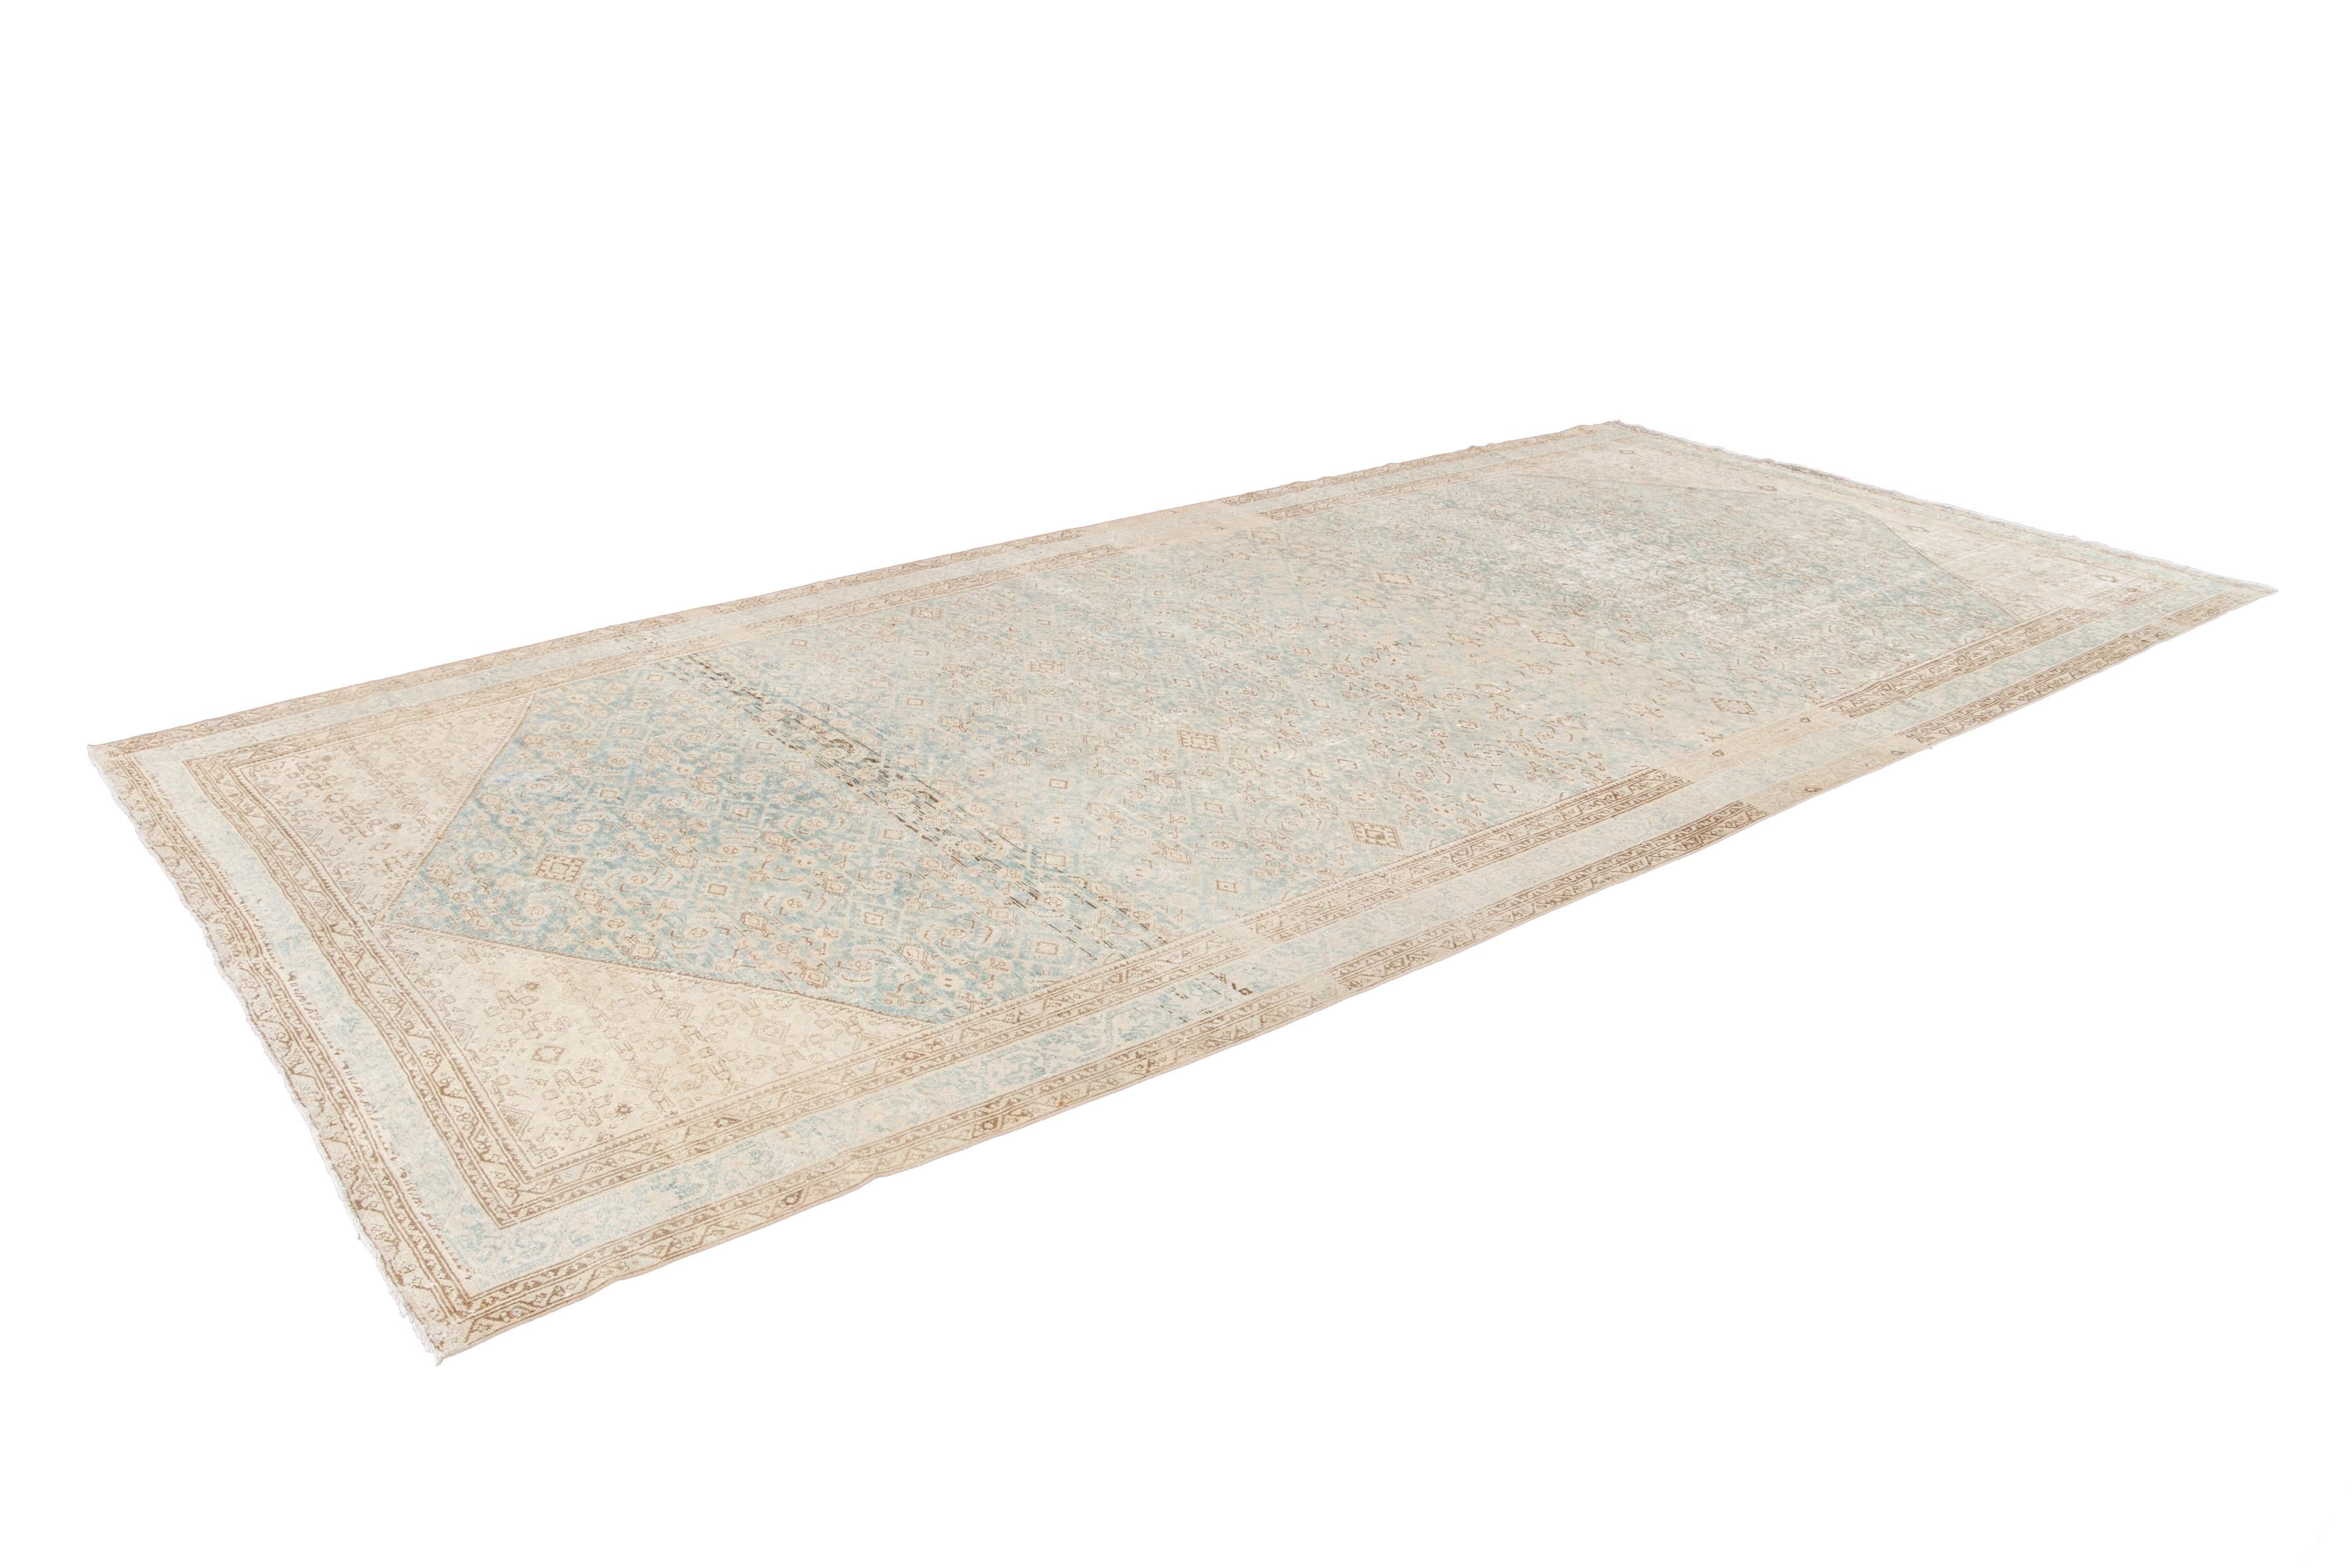 Vintage Persian Malayer with Muted Neutral Tones Wool Runner. 7'5